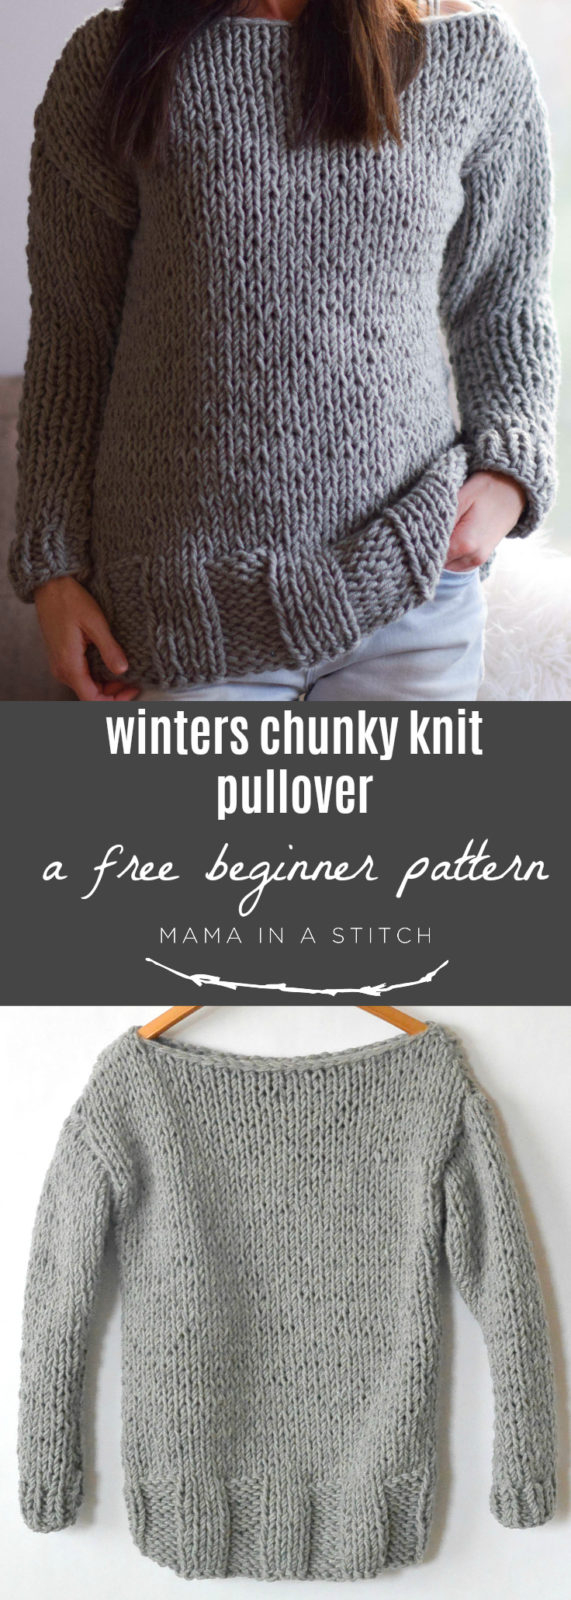 Free Knitting Patterns For Super Chunky Yarn Winters Chunky Easy Knit Pullover Pattern Mama In A Stitch